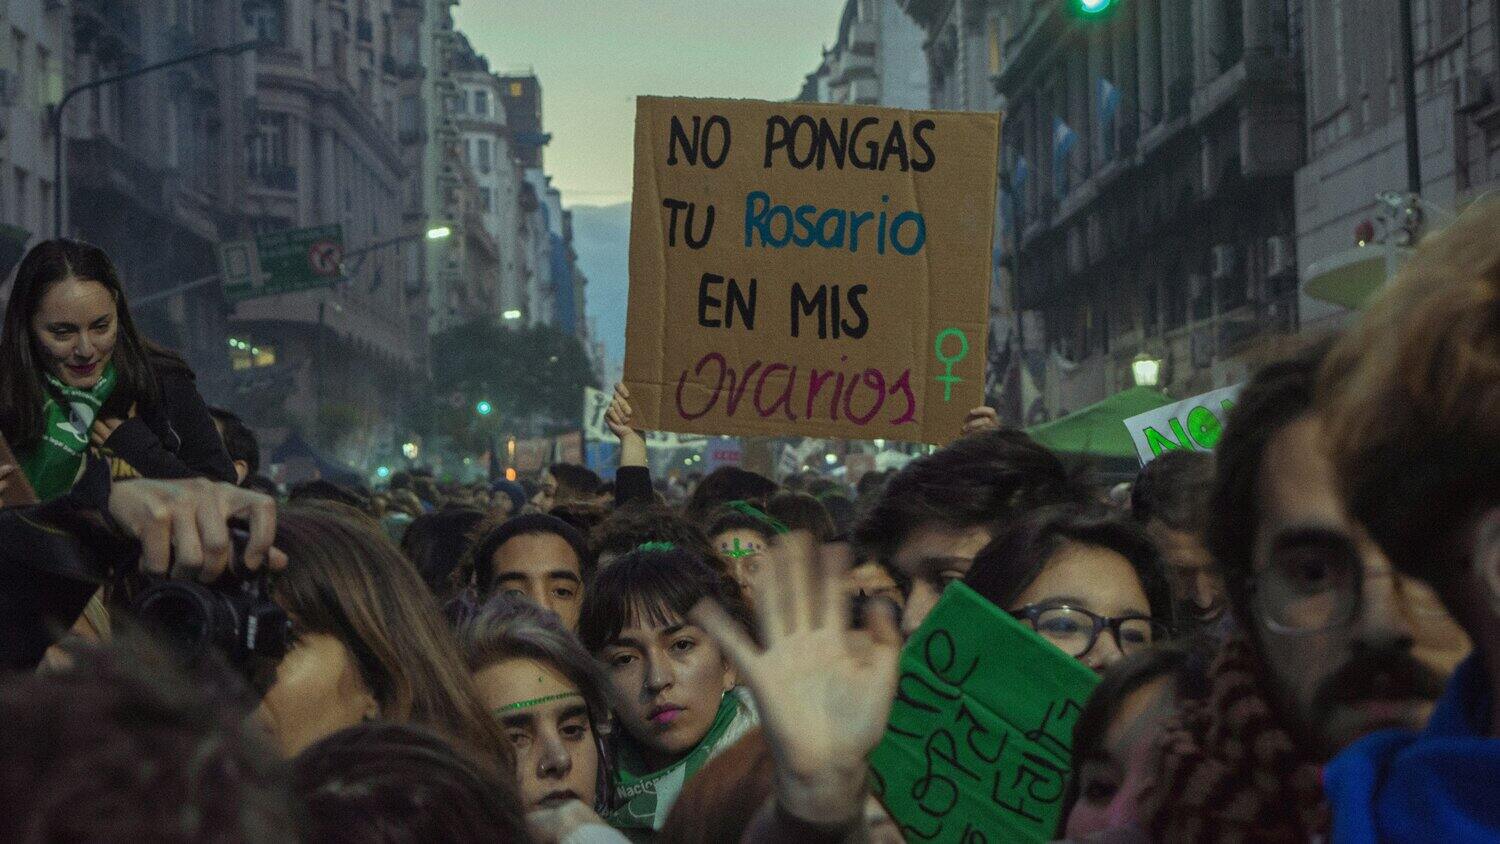 Image of hundreds people on the street at night. Many wear green headbands and are facing forward. A few people at the front of the crowd turn back, and others in the middle of the crowd are holding up a sign.